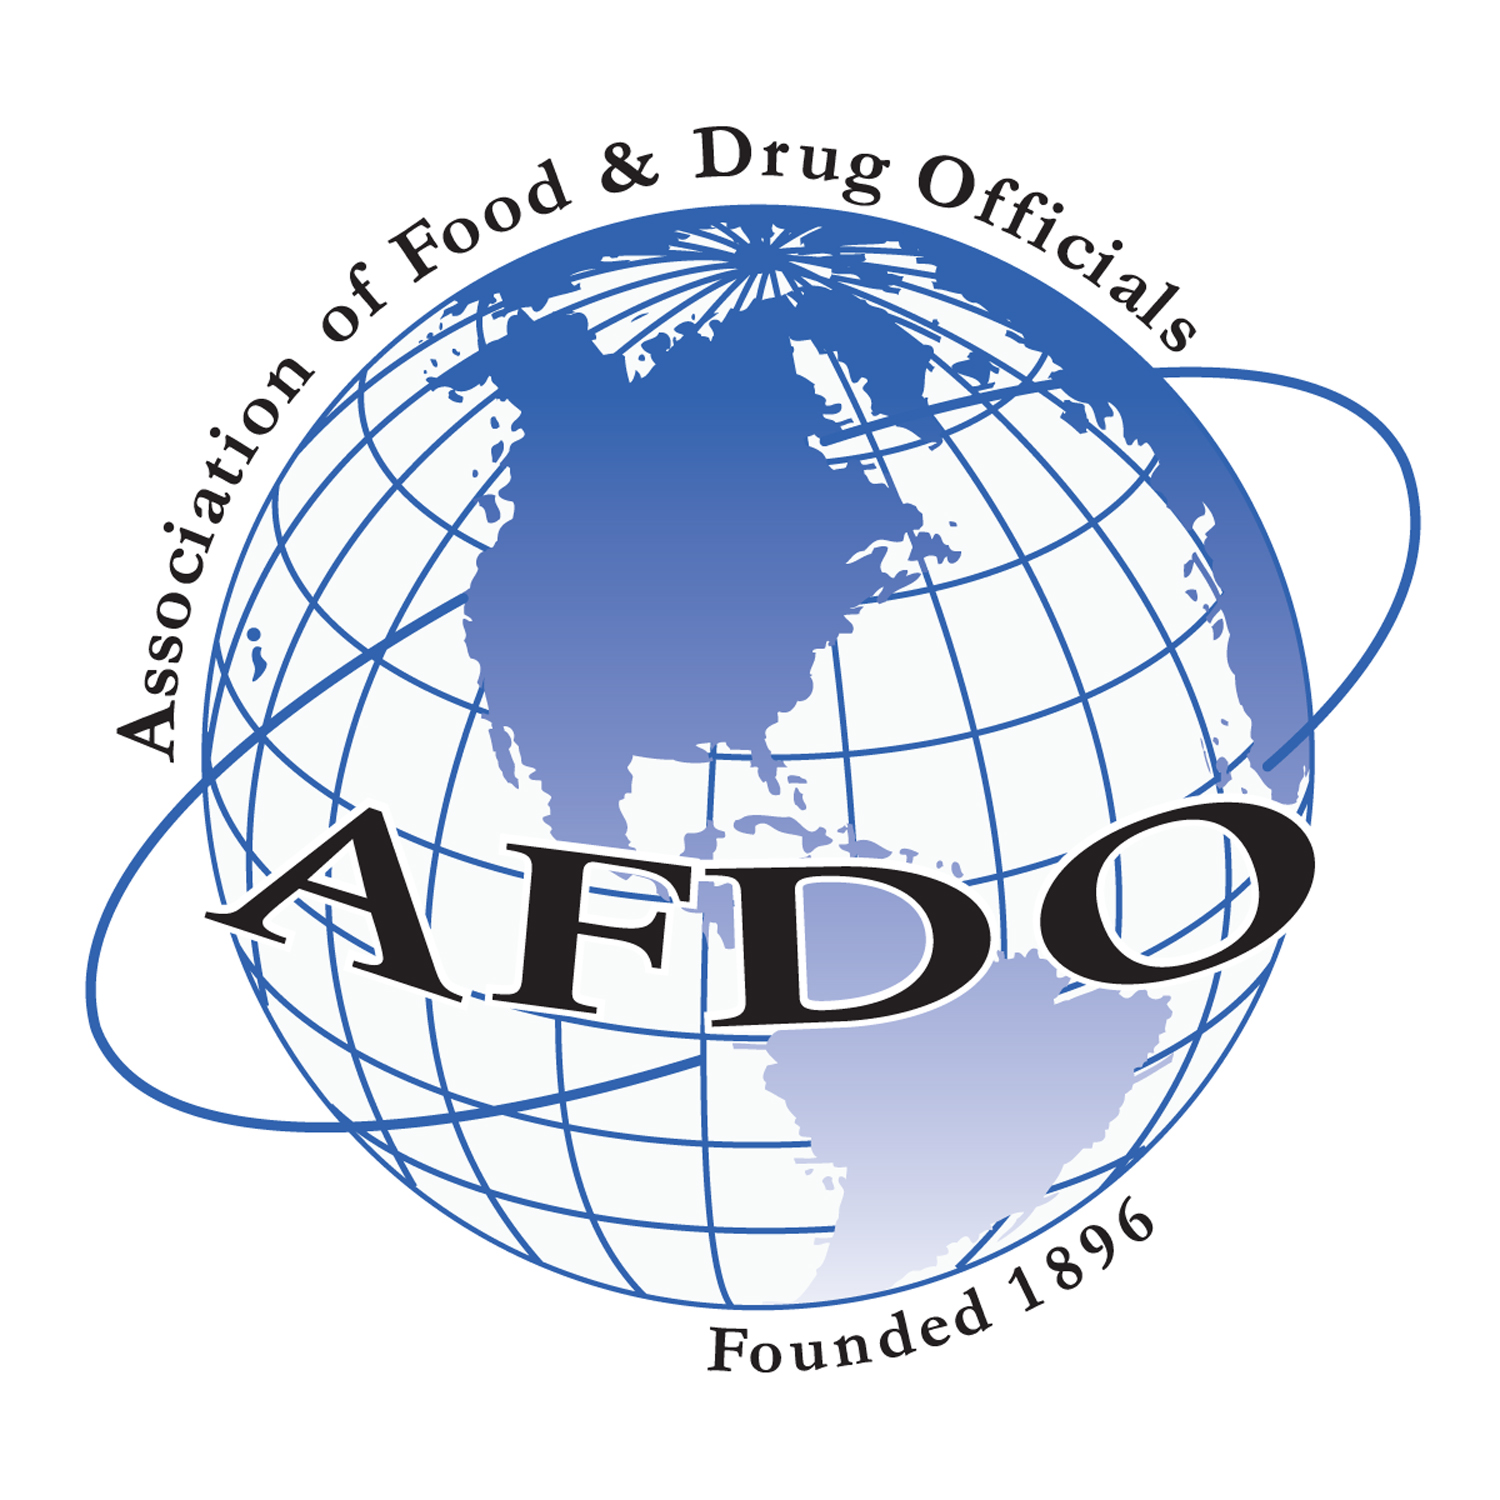 Association of Food and Drug Officials (AFDO) Announces 119th Annual